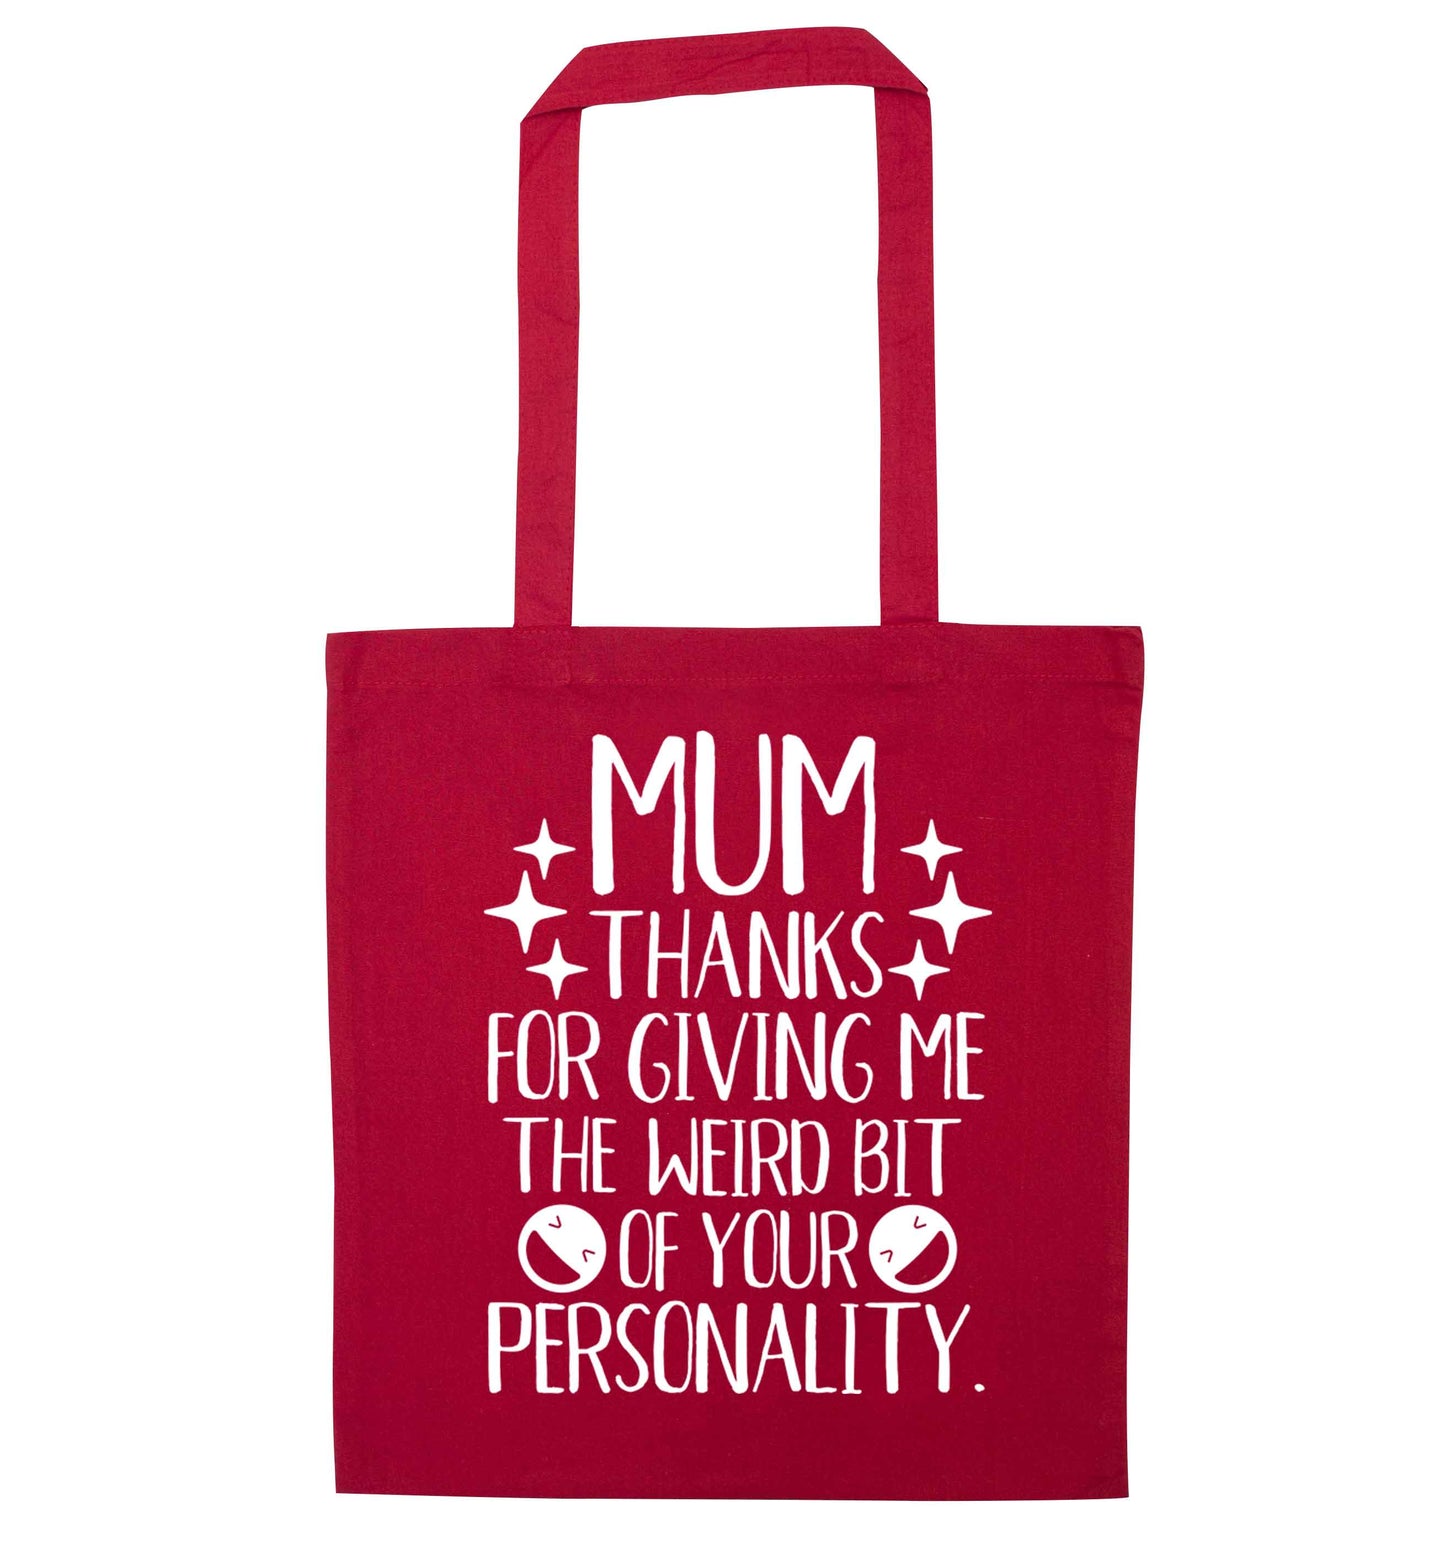 Mum thanks for giving me the weird bit of your personality red tote bag